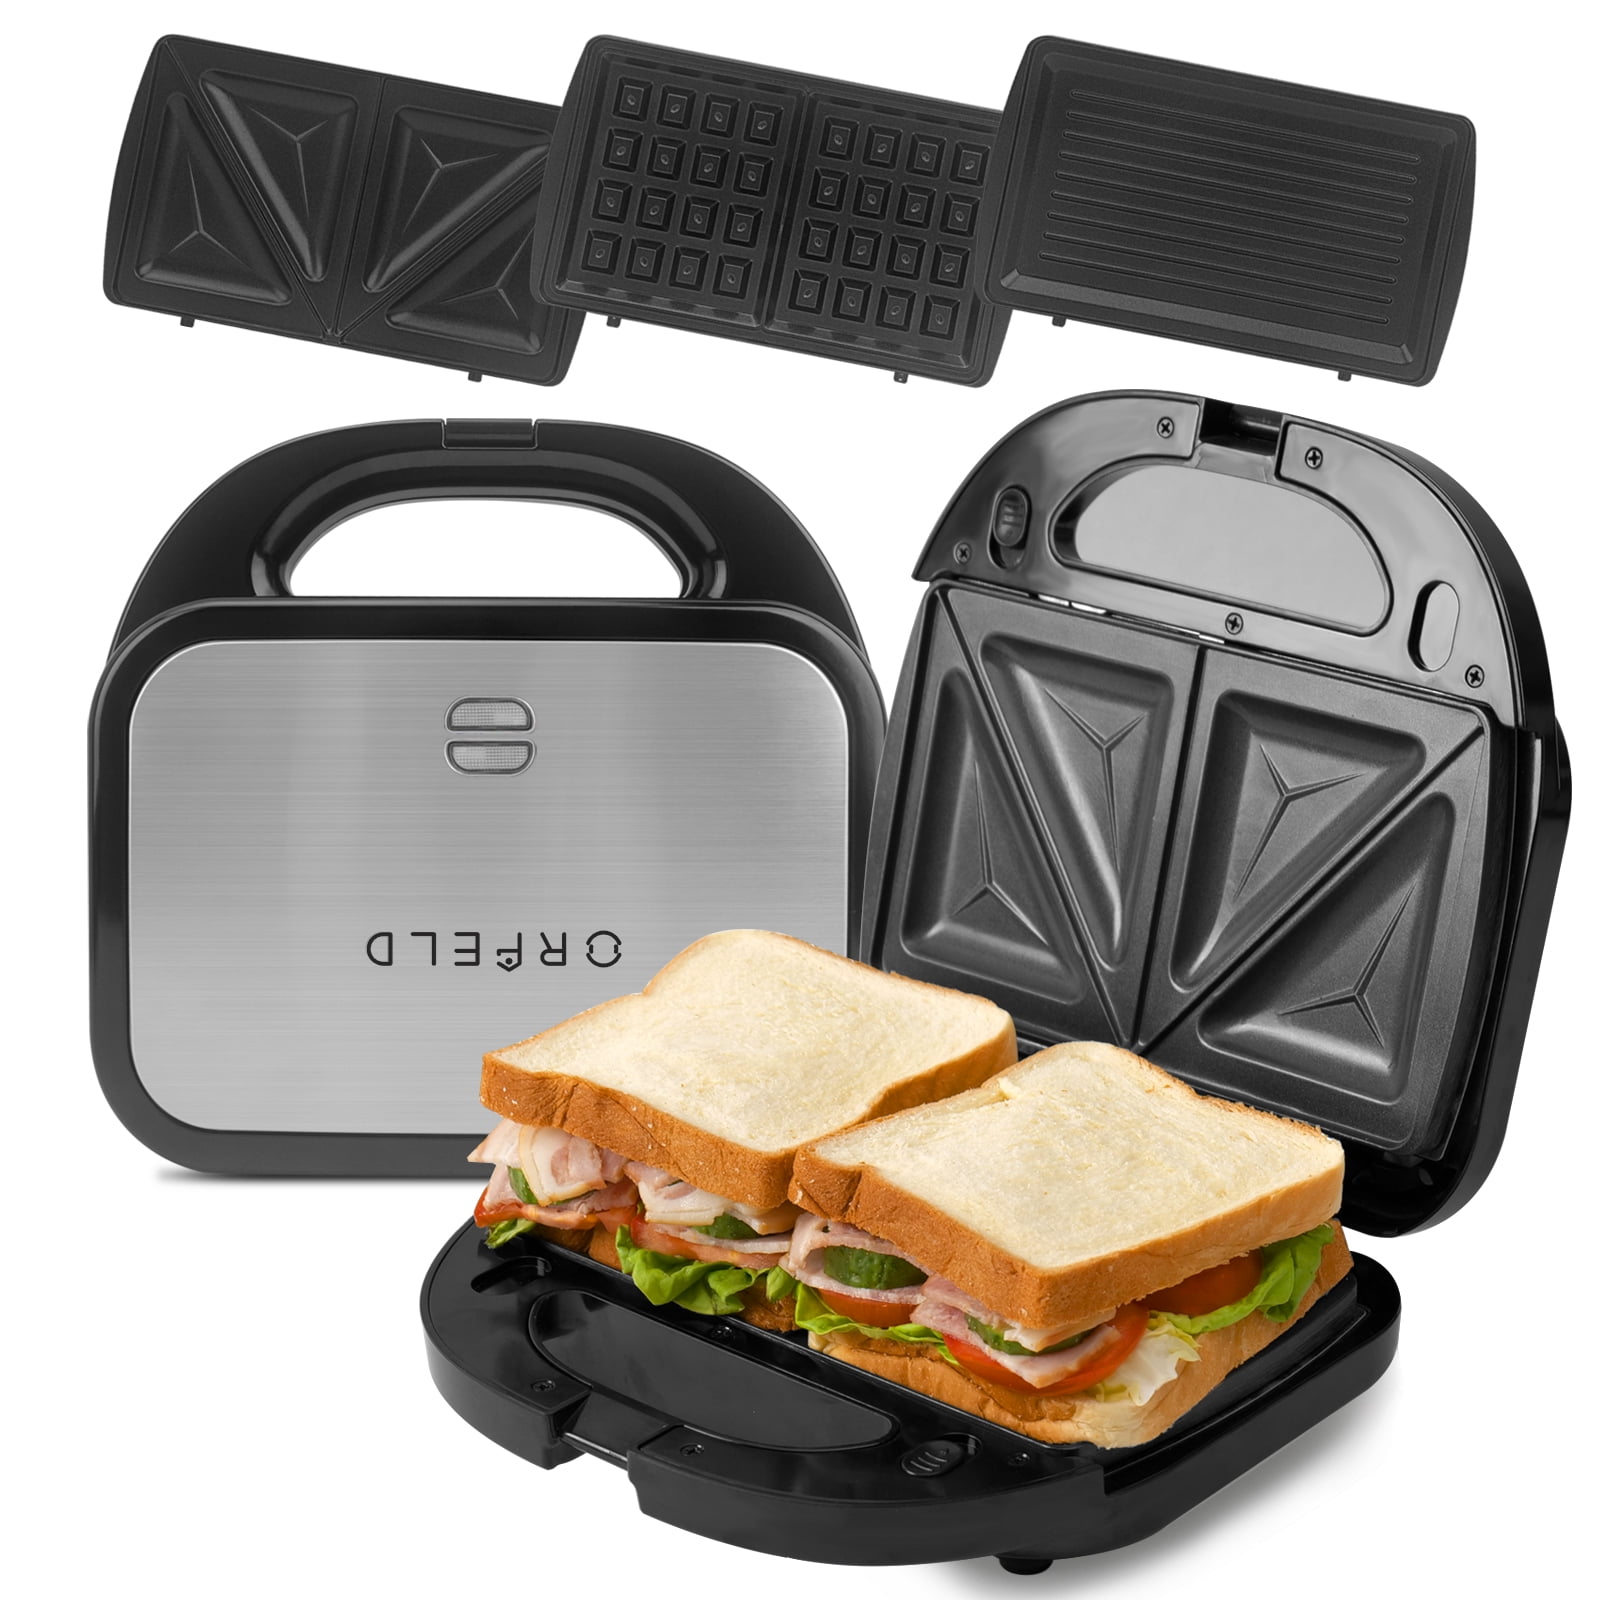 9 Ways To Use Your Sandwich Maker - Between Carpools